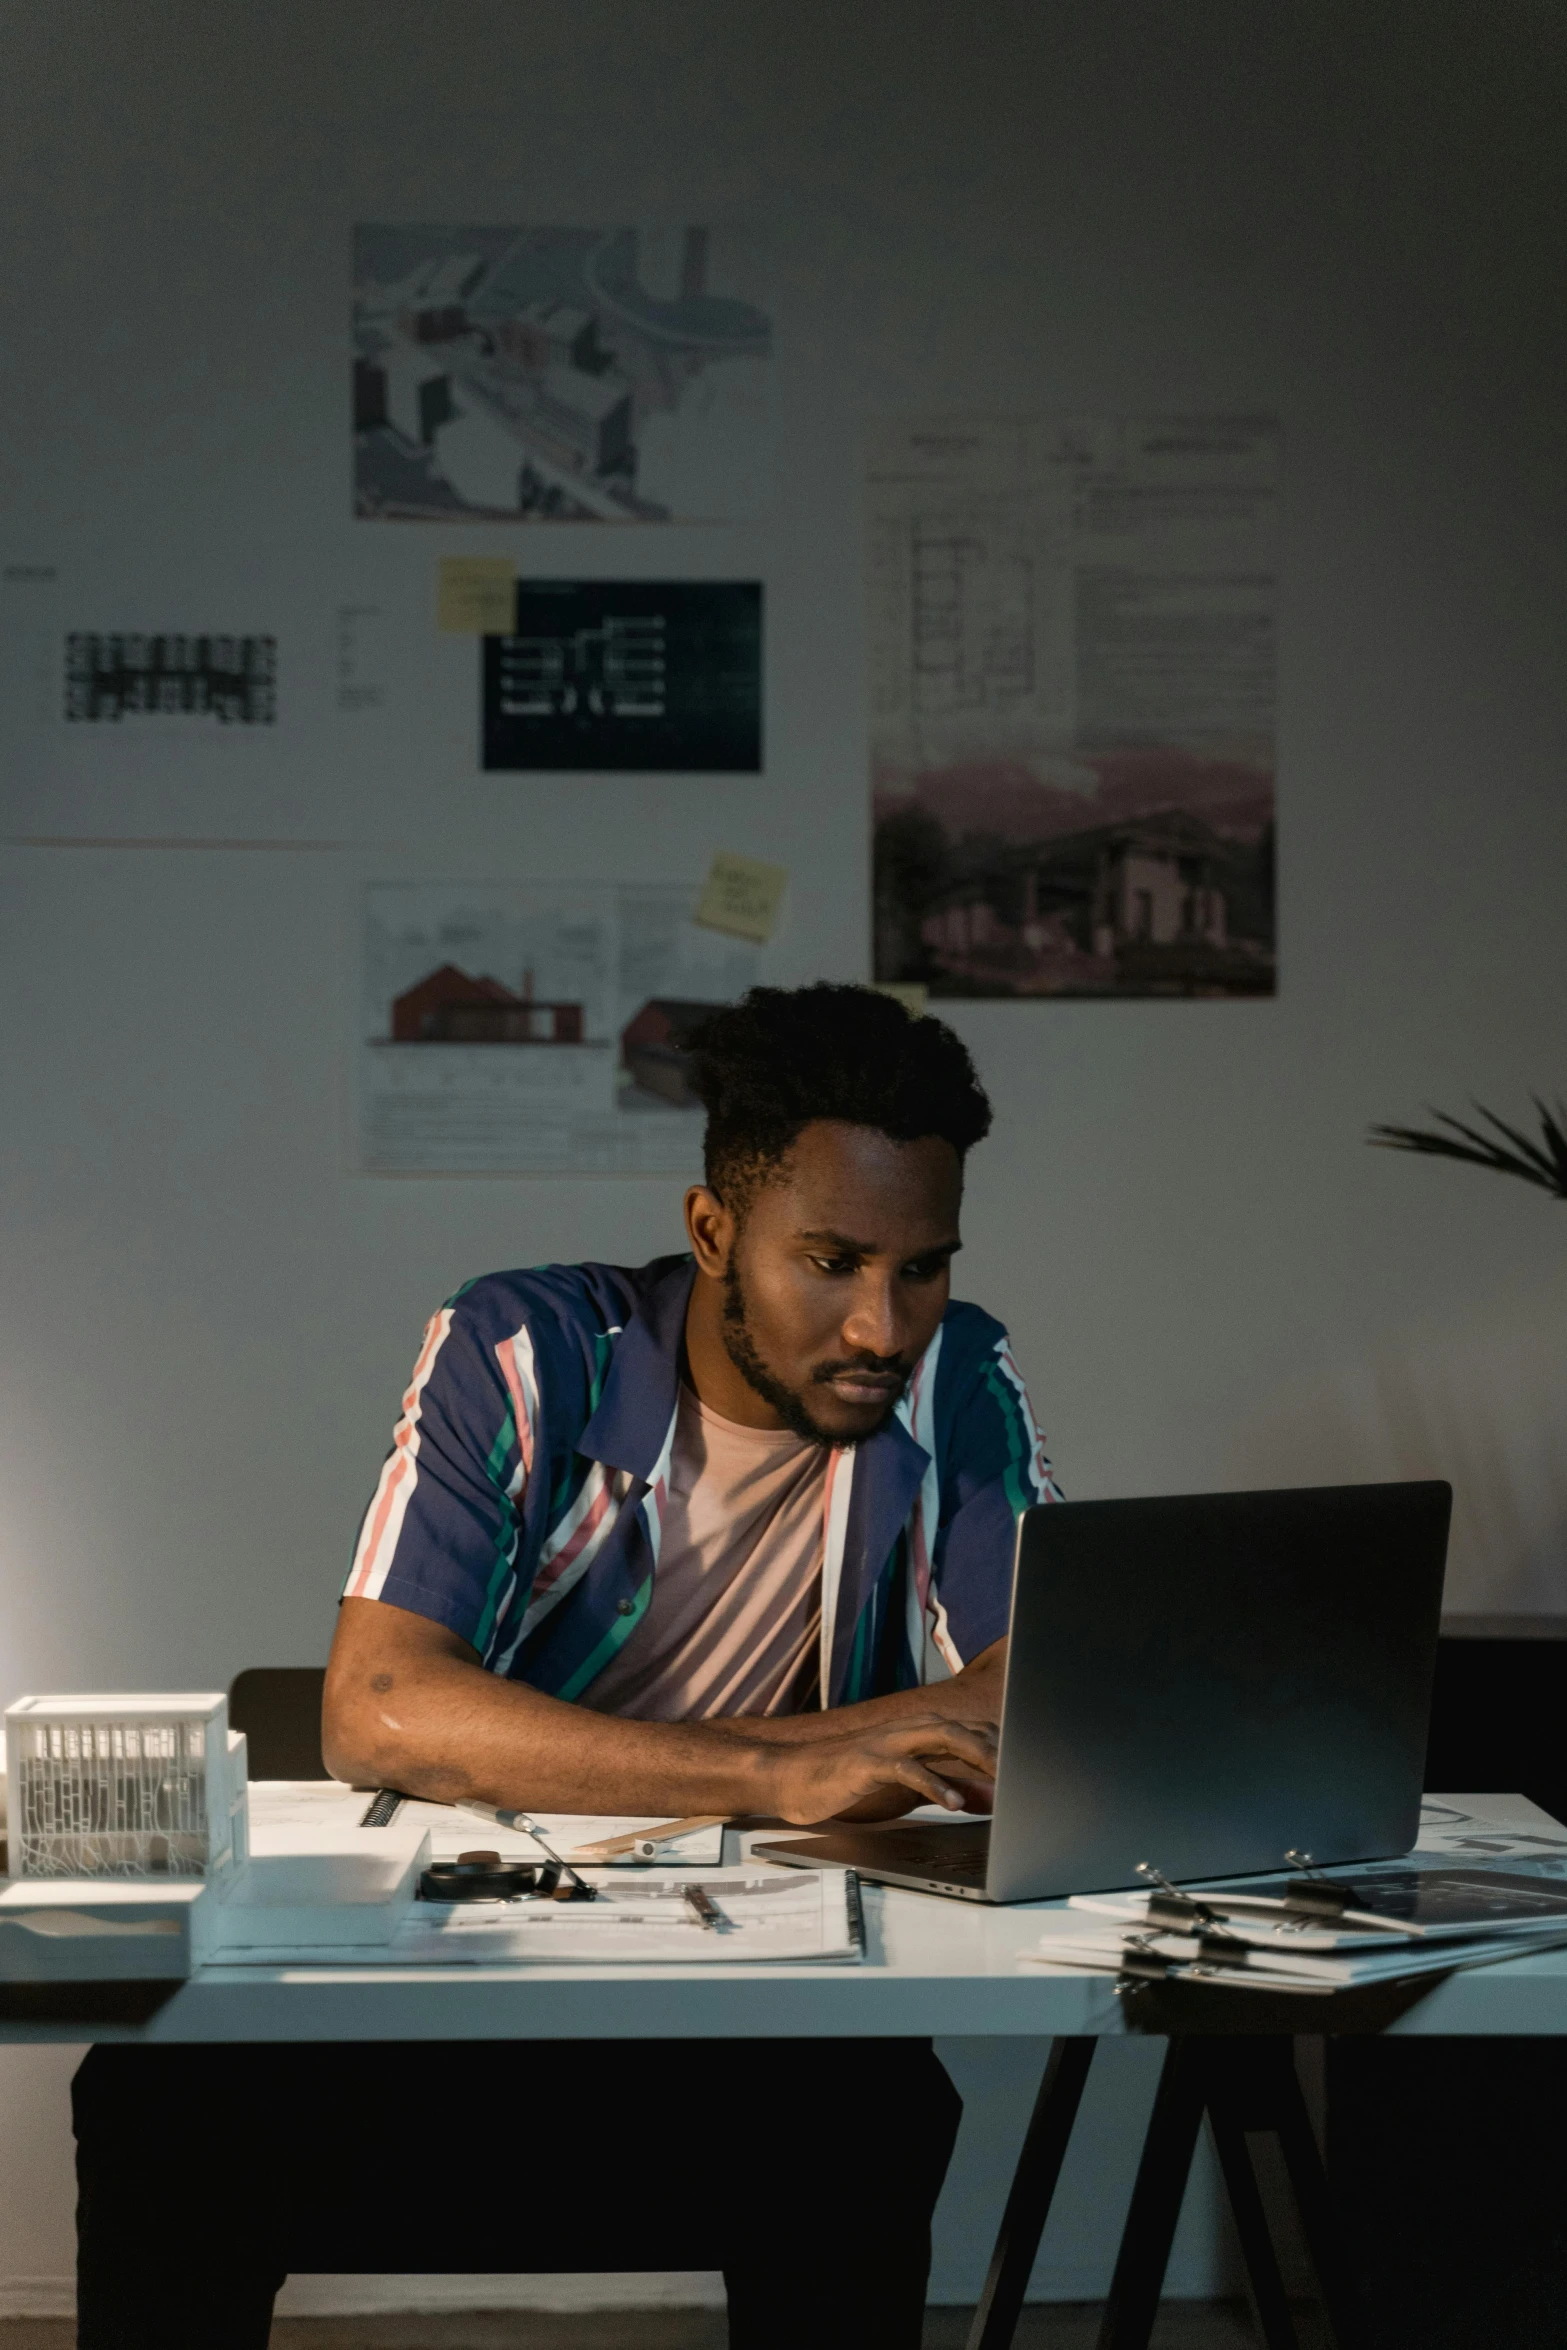 a man sitting at a desk using a laptop computer, inspired by Afewerk Tekle, pexels contest winner, bisexual lighting, ignant, someone lost job, looking serious